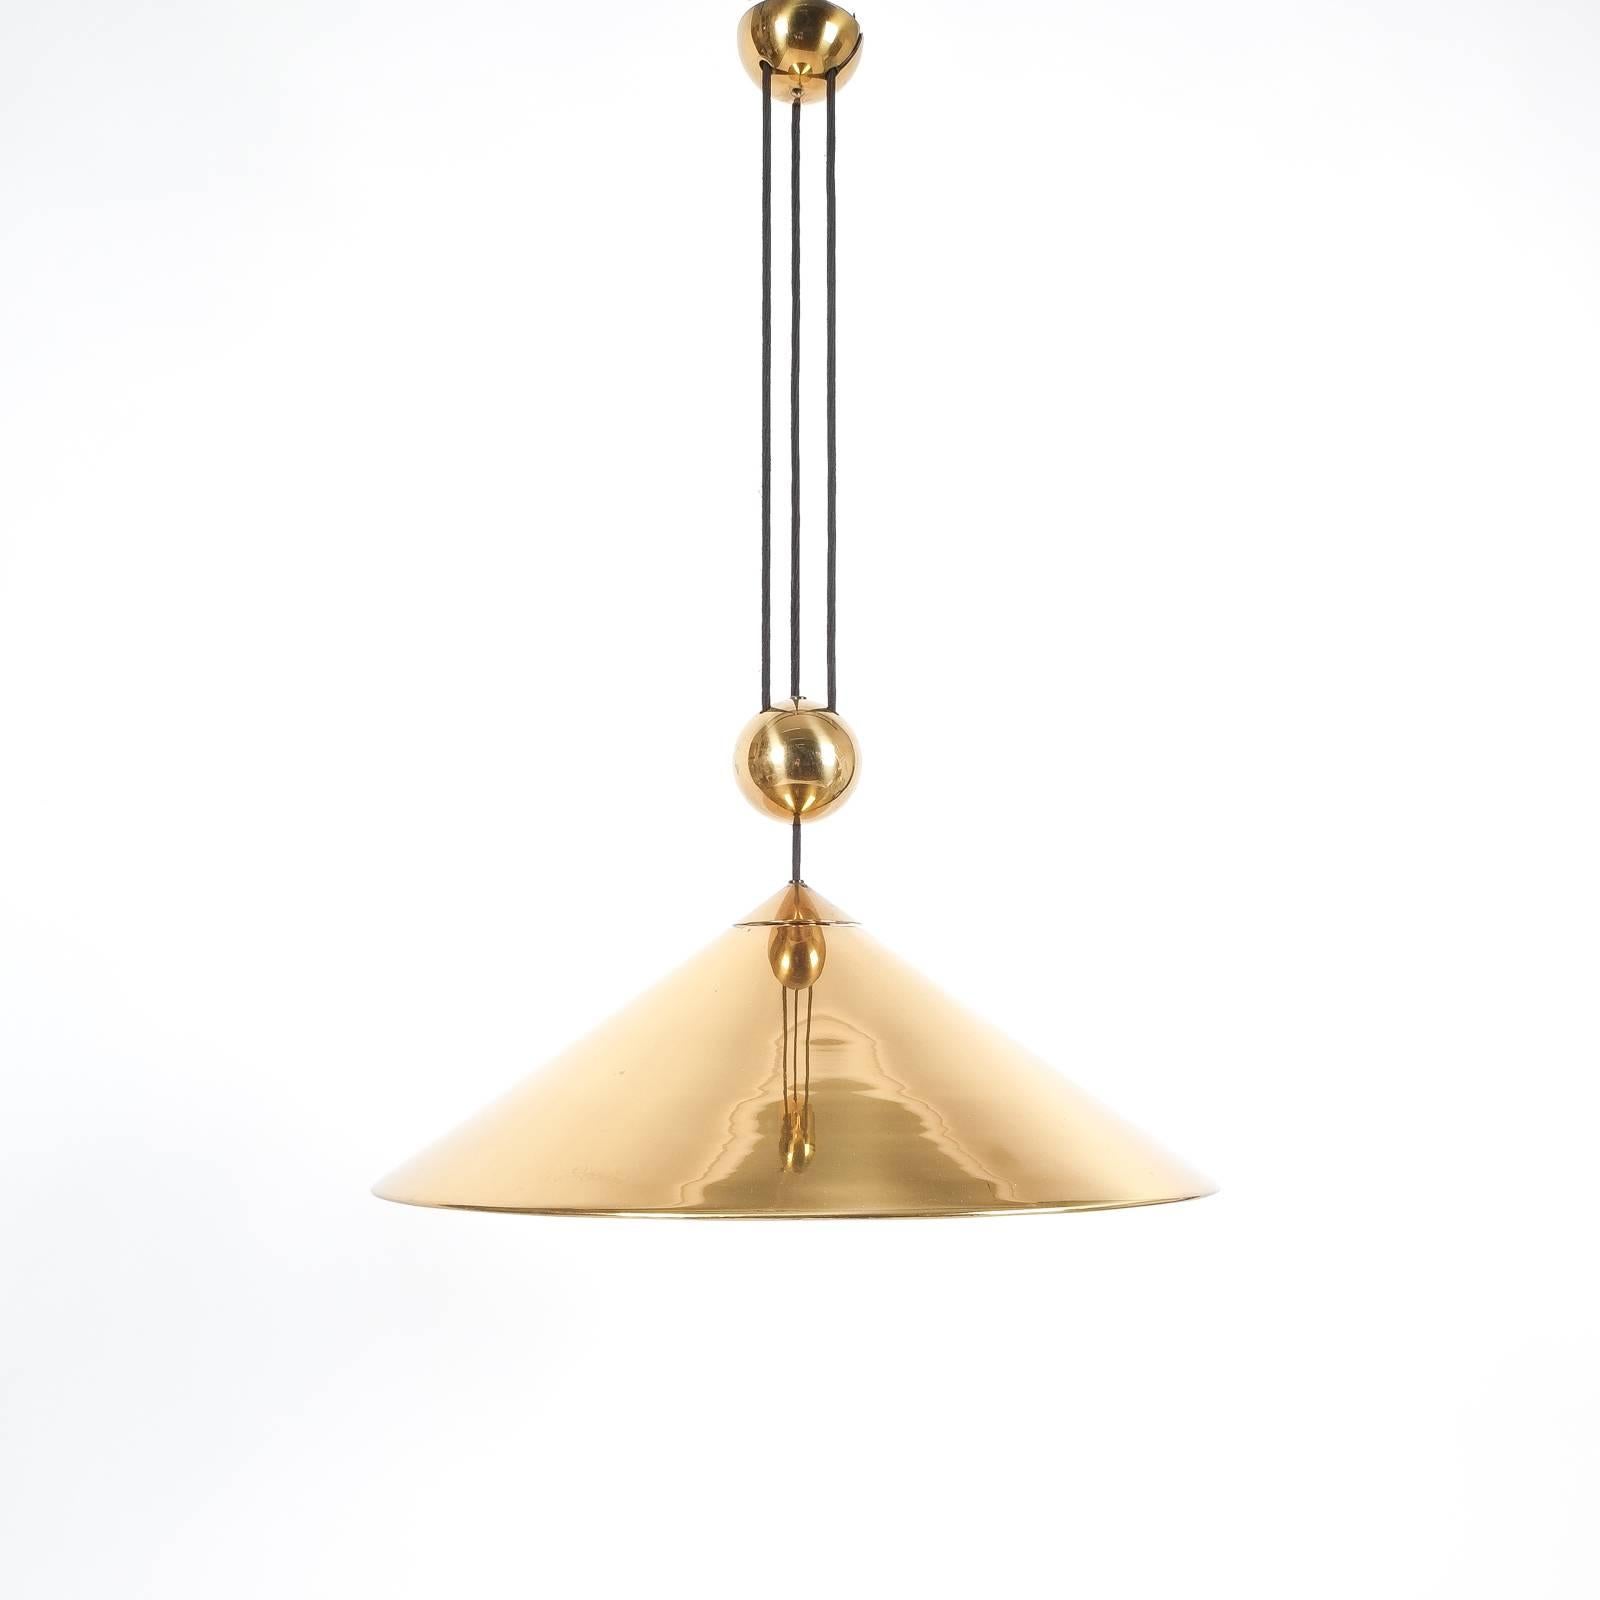 Hollywood Regency Large Adjustable Polished Brass Counterweight Pendant Lamp by Florian Schulz